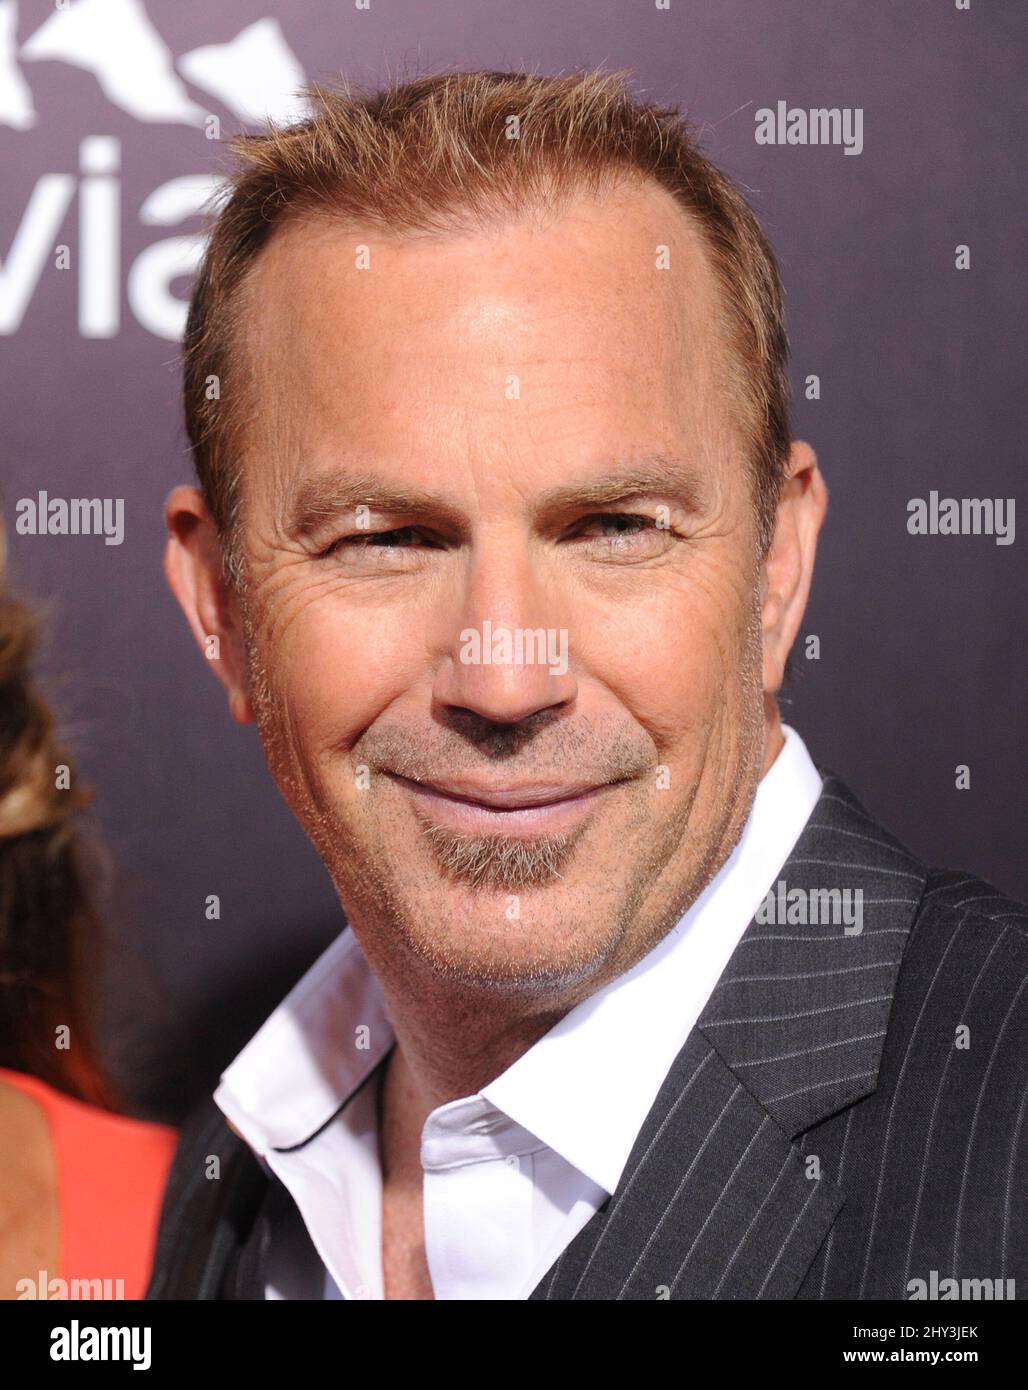 Kevin Costner bei der US-Premiere „3 Days to Kill“ im ArcLight Theater in Los Angeles, USA. Stockfoto